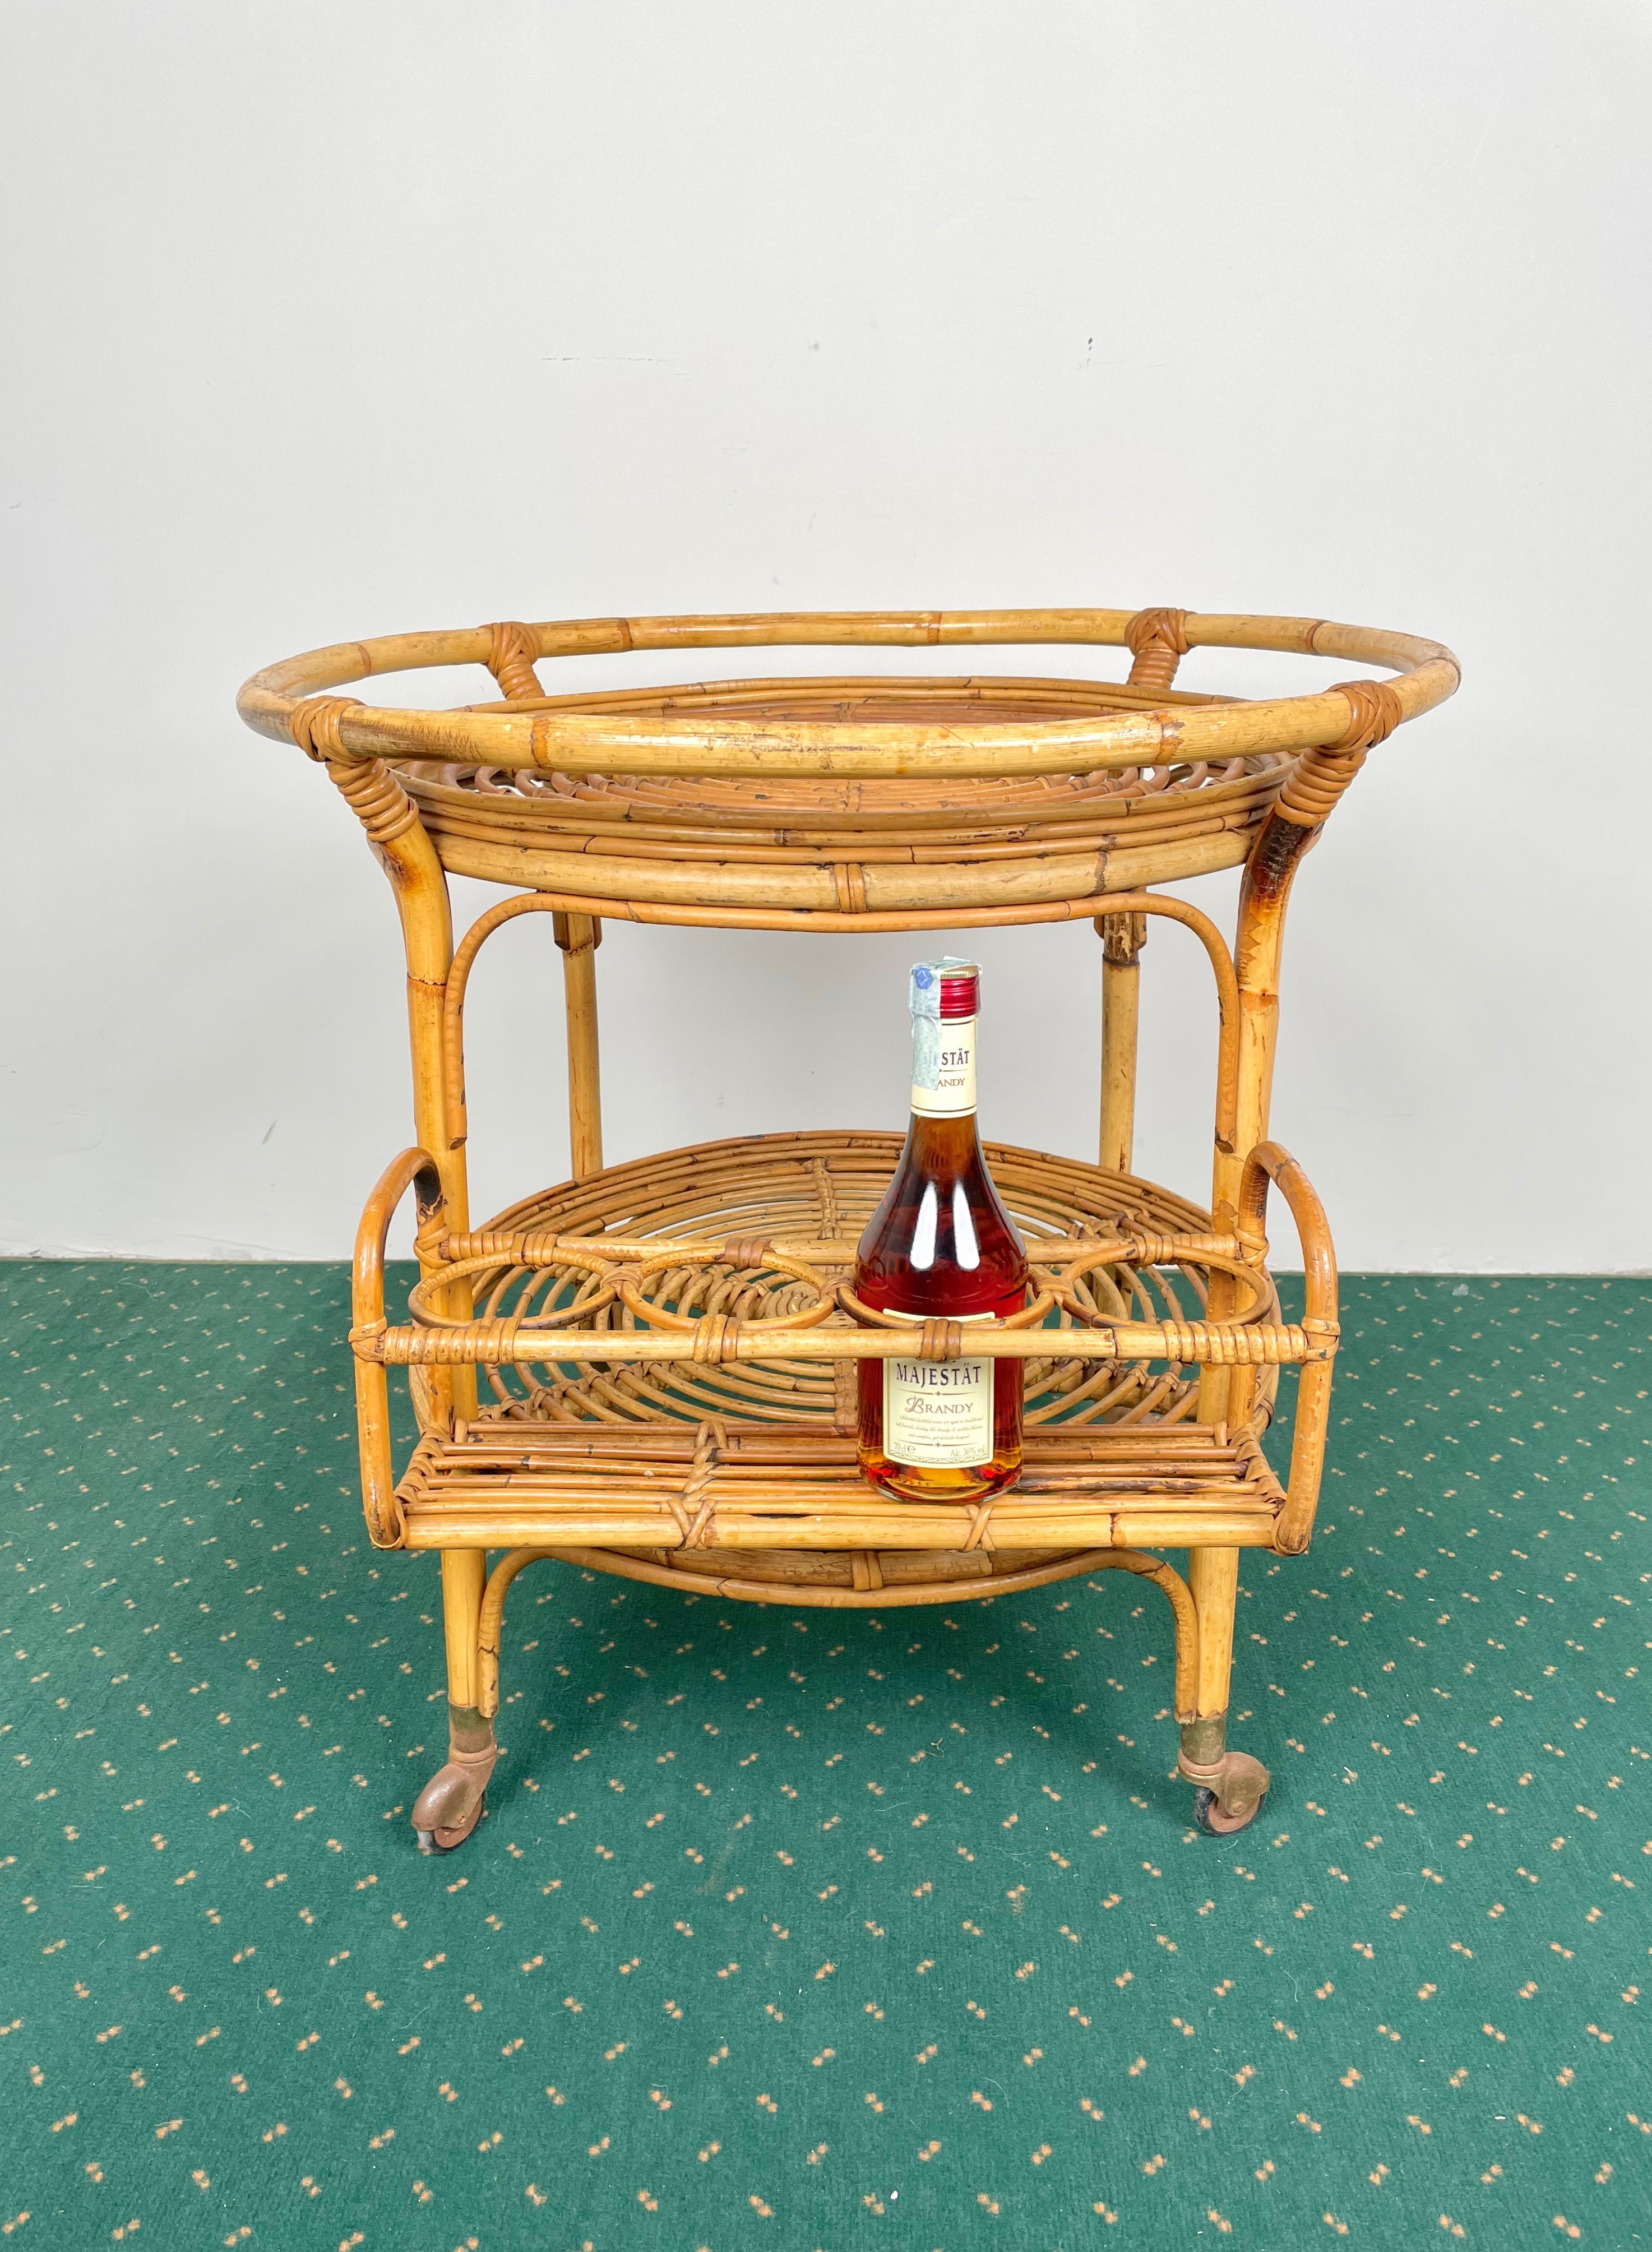 Bamboo & Rattan Round Serving Bar Cart Trolley, Italy, 1960s For Sale 3